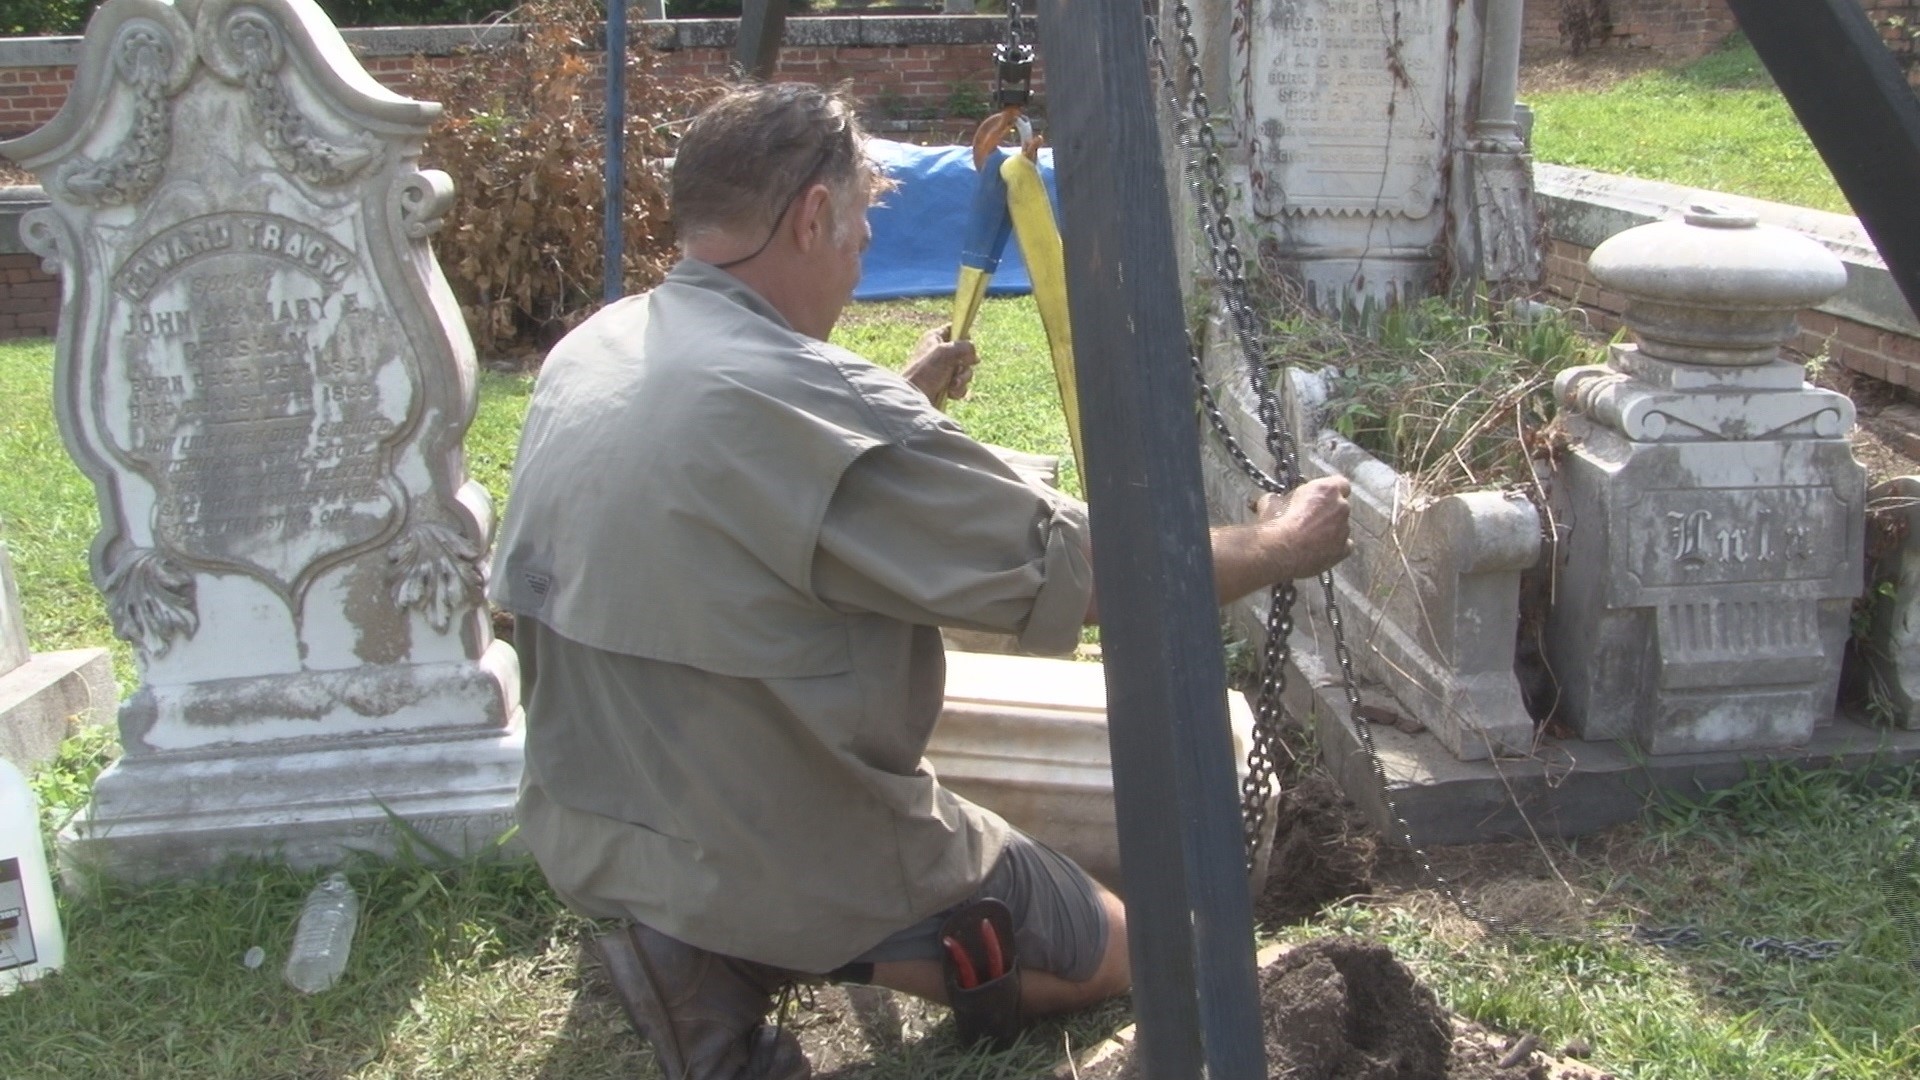 Joey Fernandez plans to use the skills he learned from historic monument preservation courses to teach others about how to properly restore Rose Hill